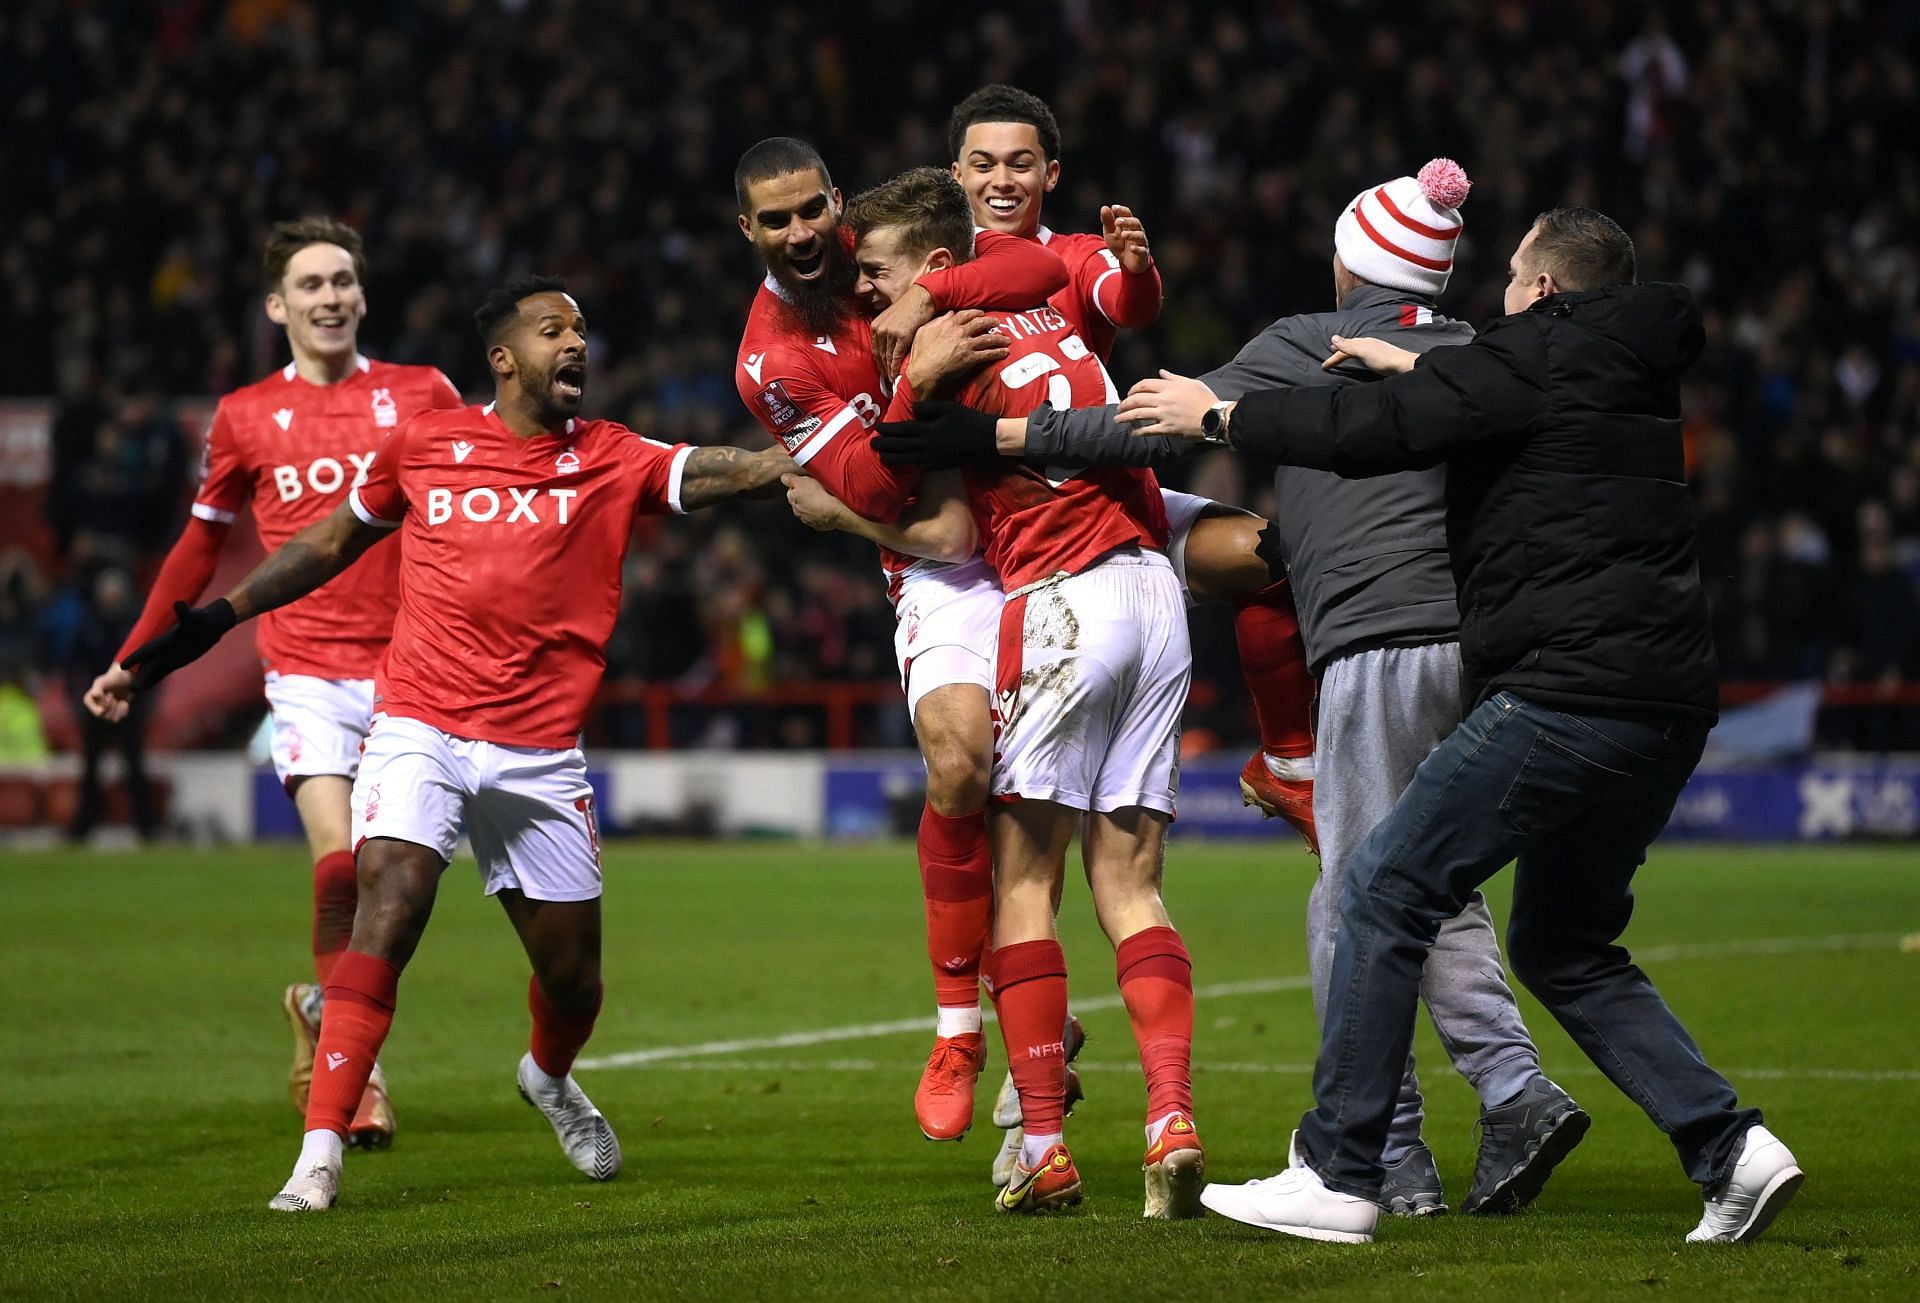 Nottingham Forest v Arsenal: Emirates FA Cup third round